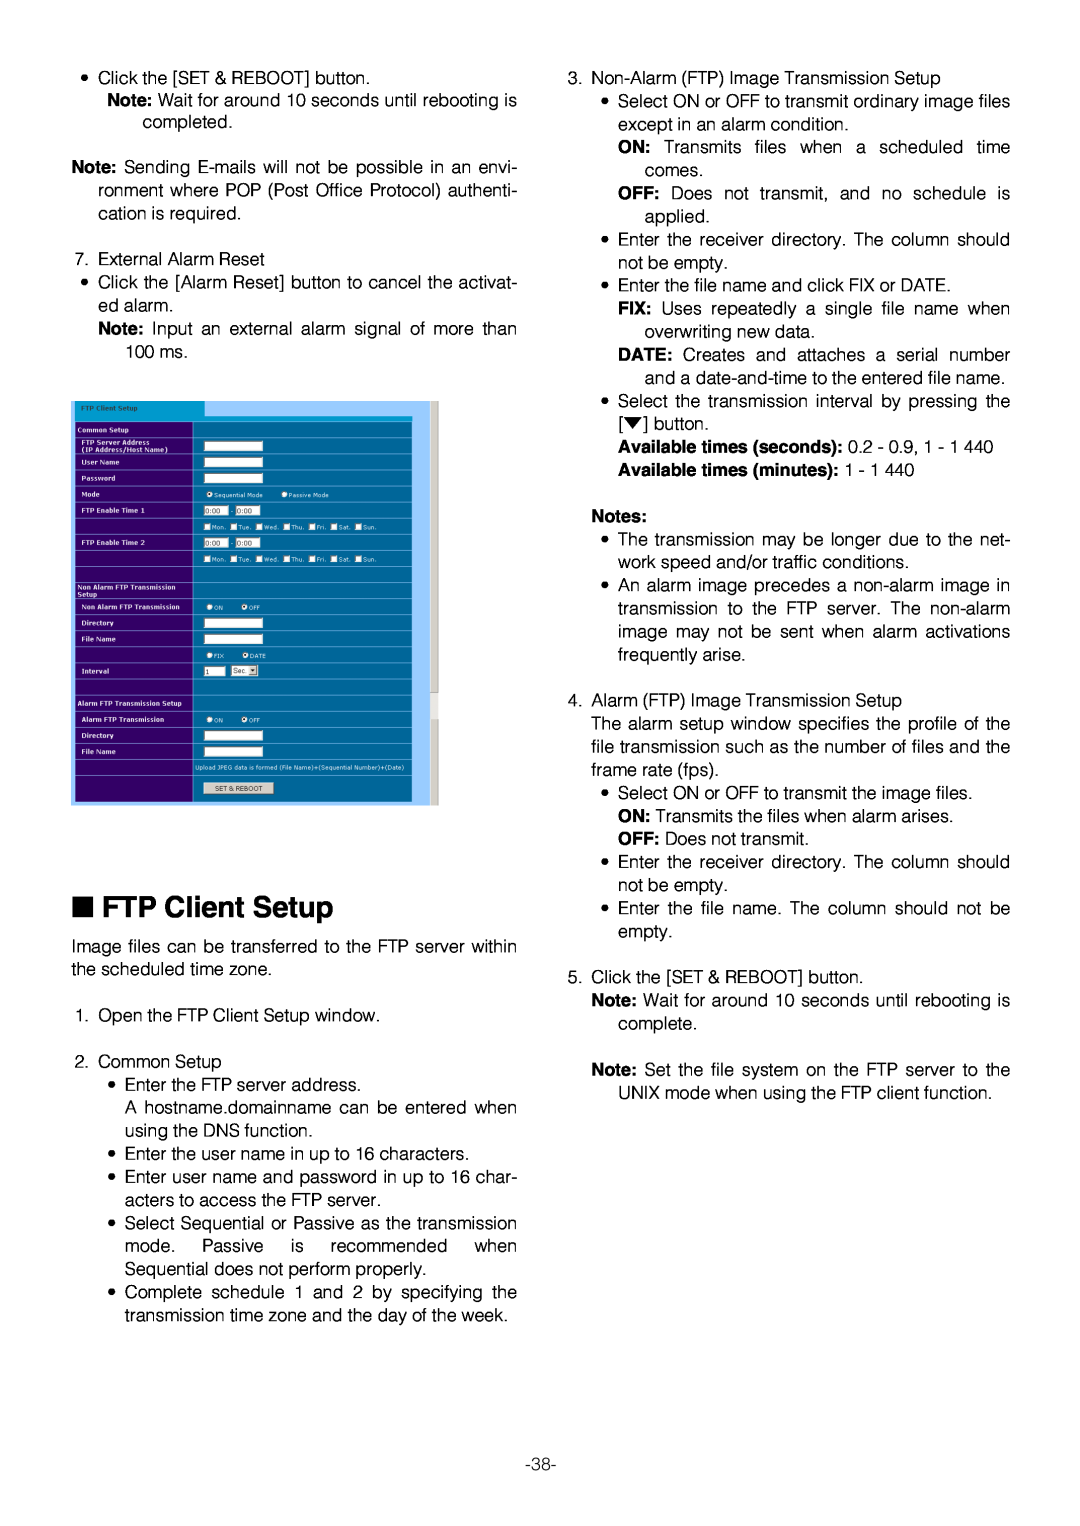 Pantech WV-NW474S manual FTP Client Setup, Available times seconds, Available times minutes 1 - 1 Notes 